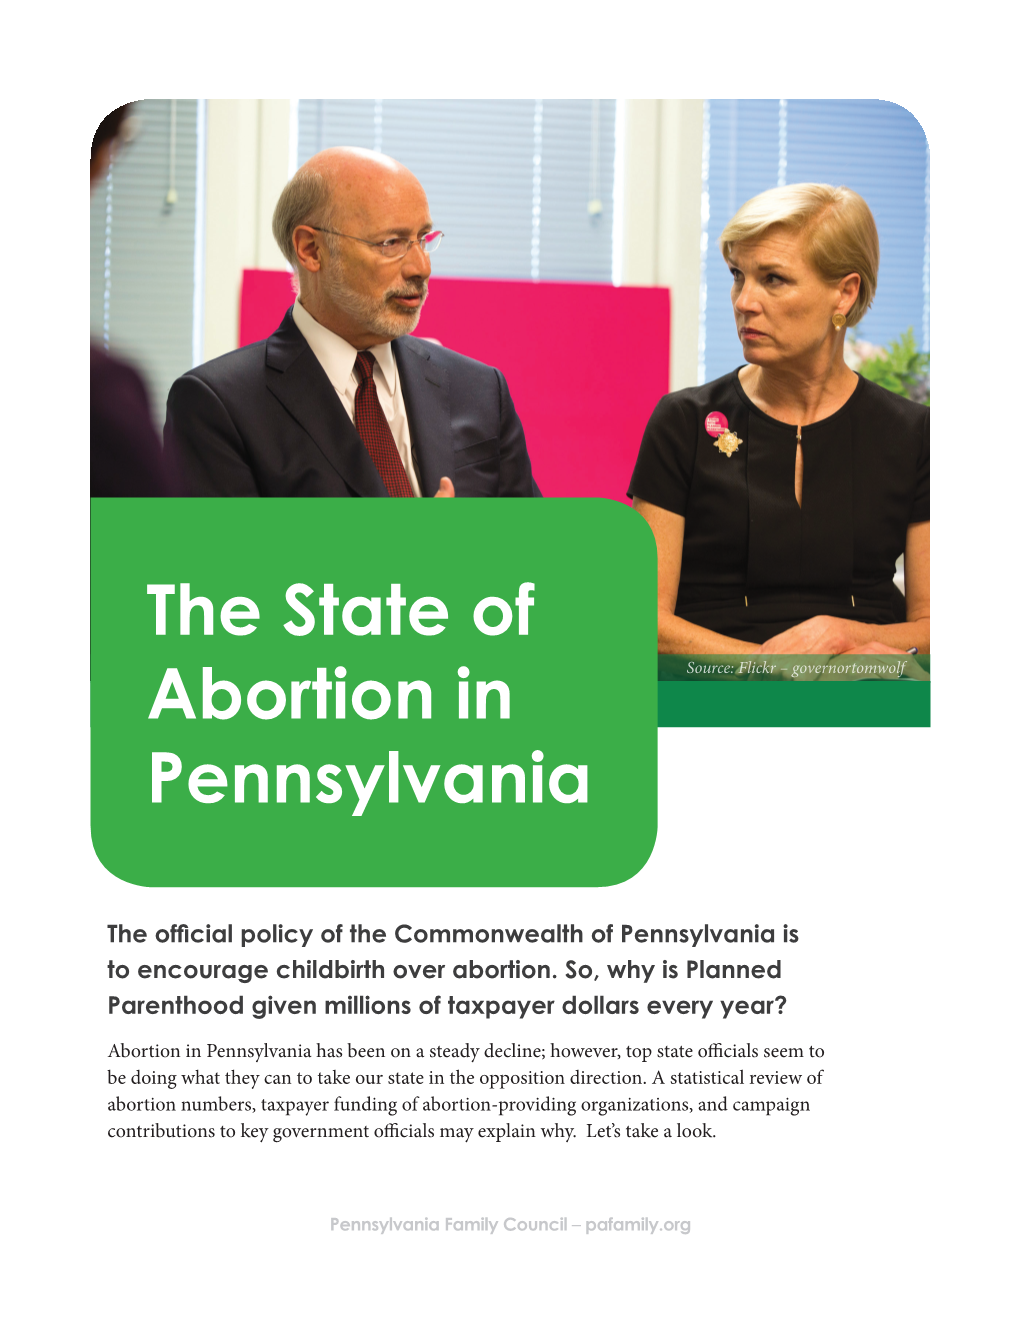 The State of Abortion in Pennsylvania